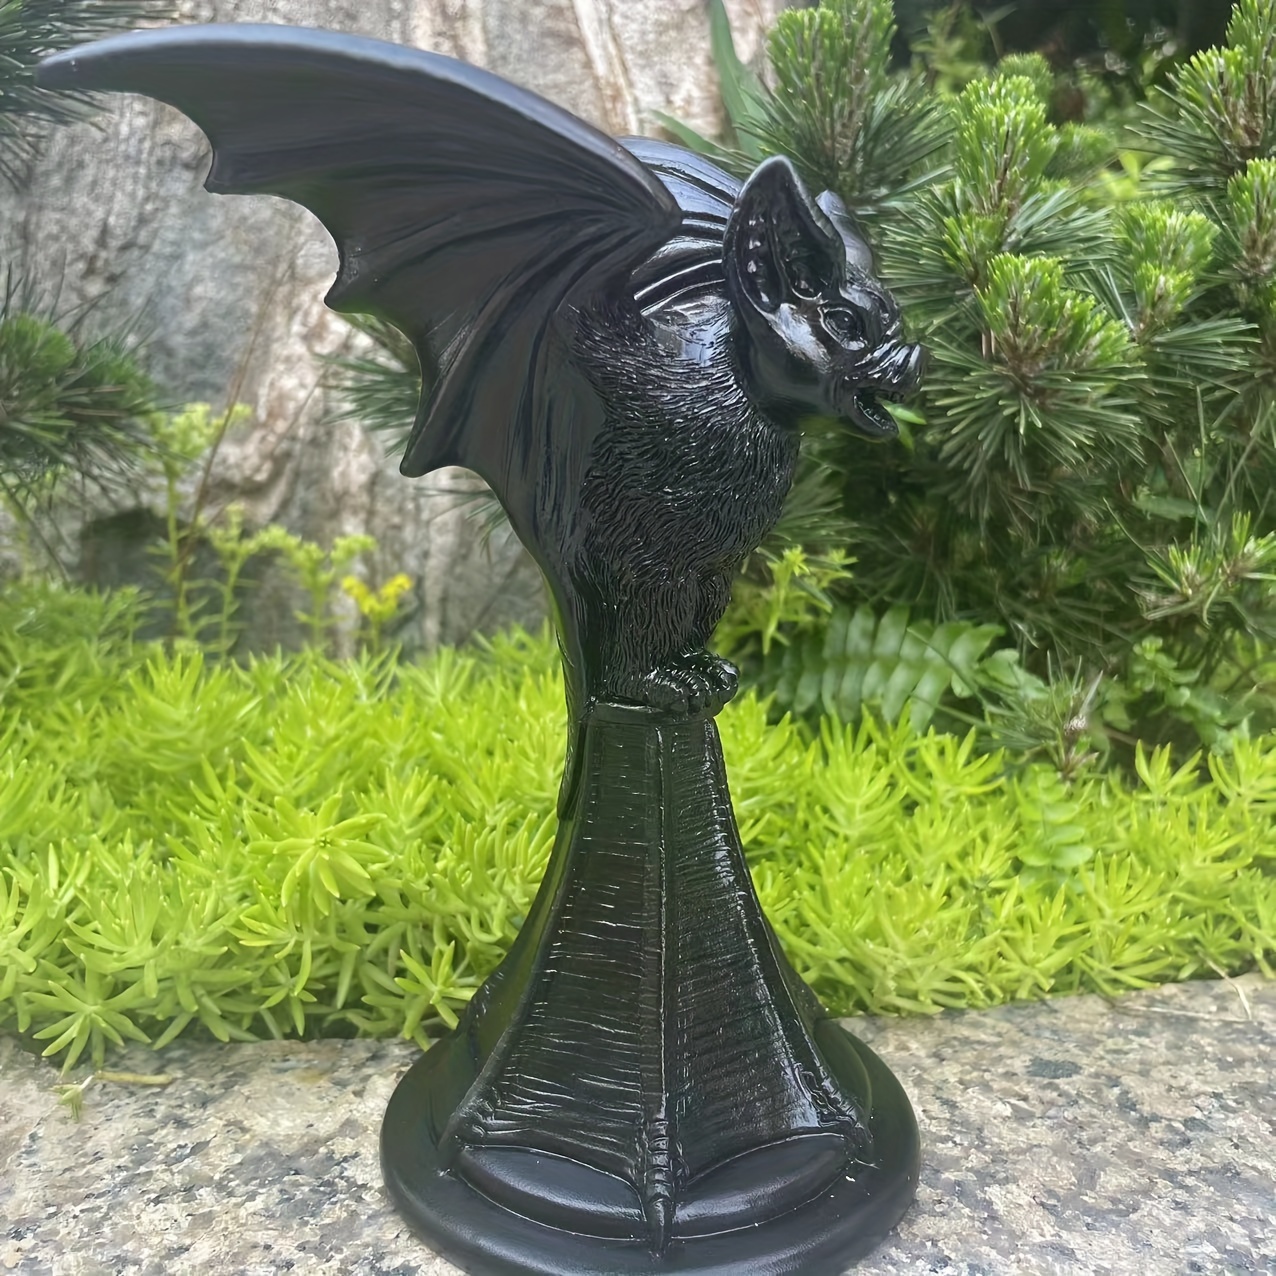 

1pc Classic Bat Statue - Resin Garden & Home Decor, Perfect For Halloween Outdoor Display